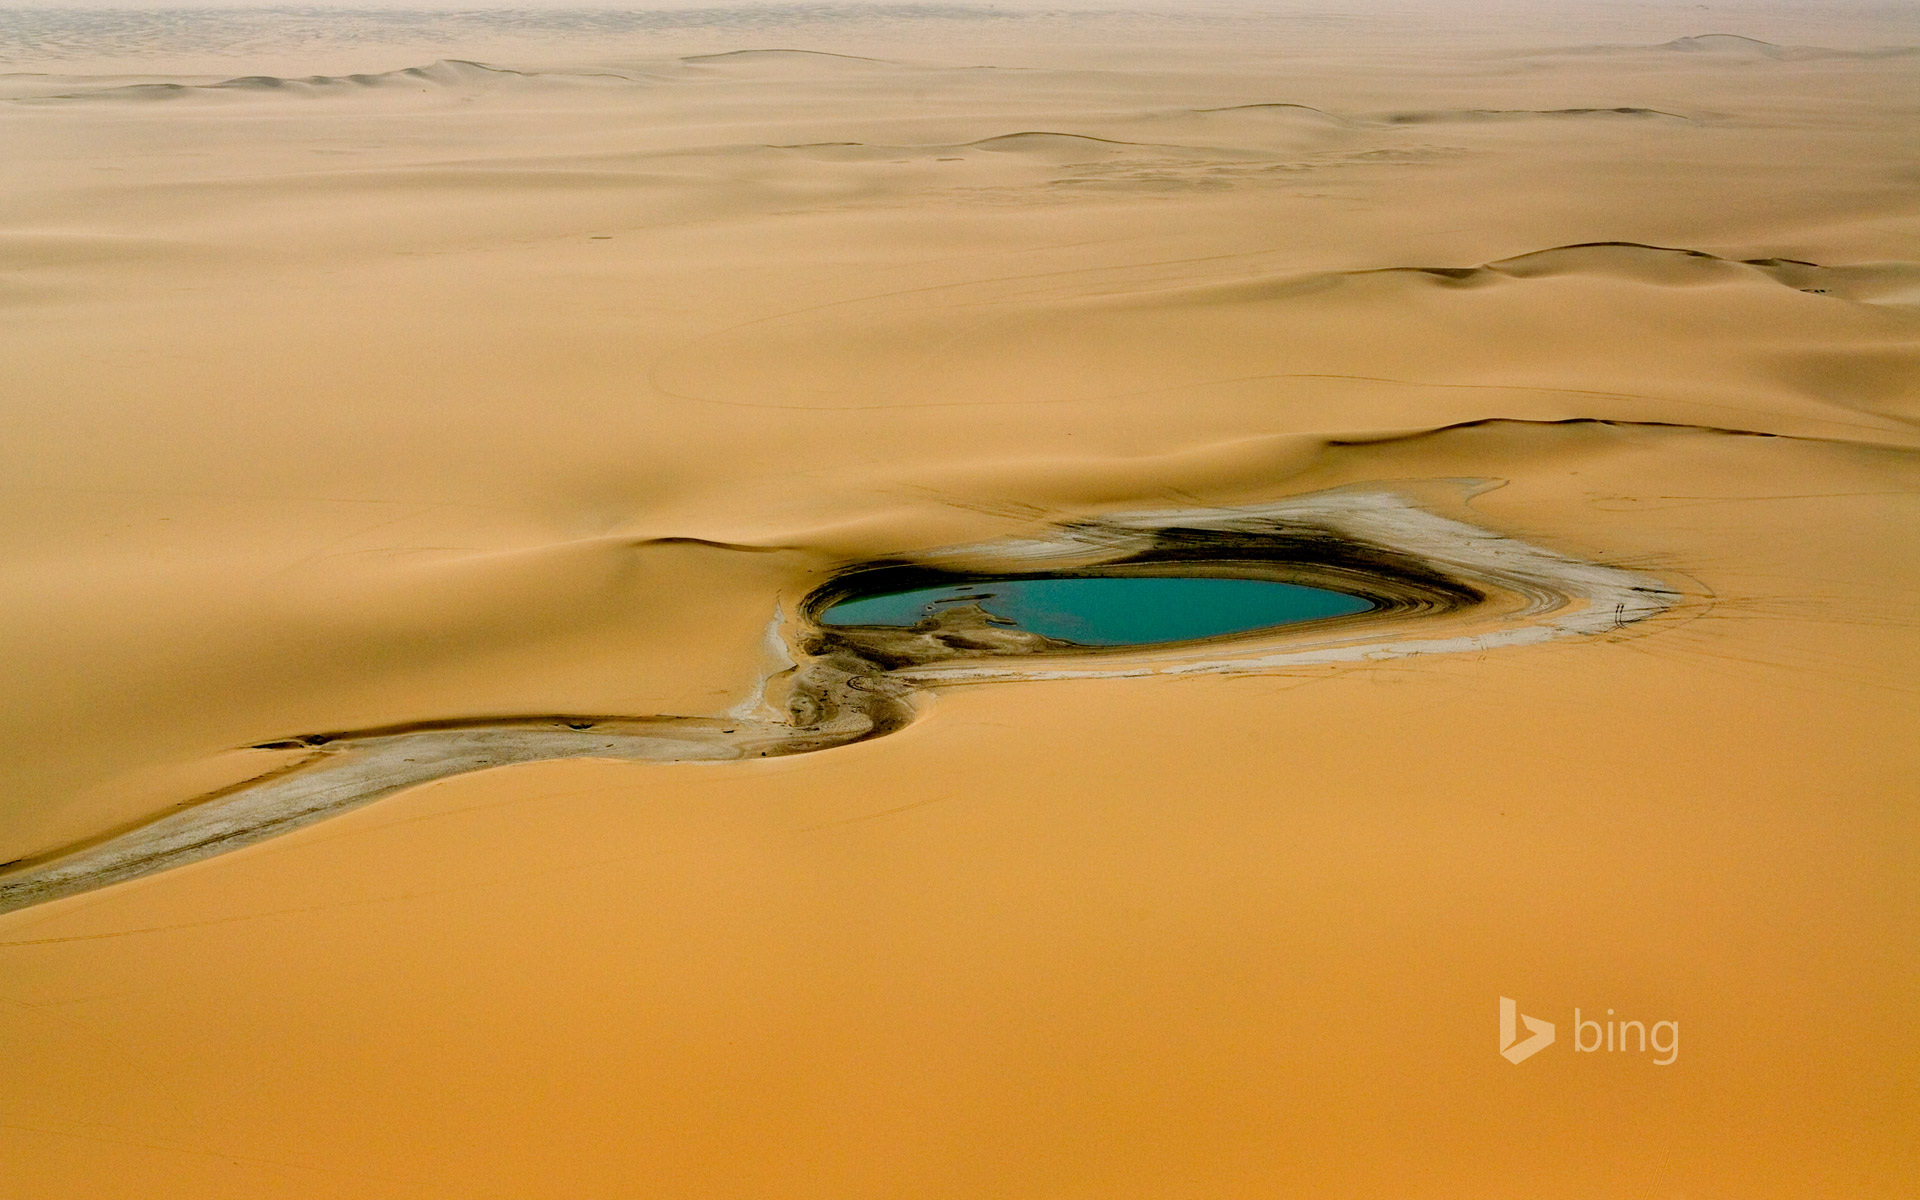 Accumulation of rainwater in the Sahara Desert, east of the Aïr Mountains, Niger